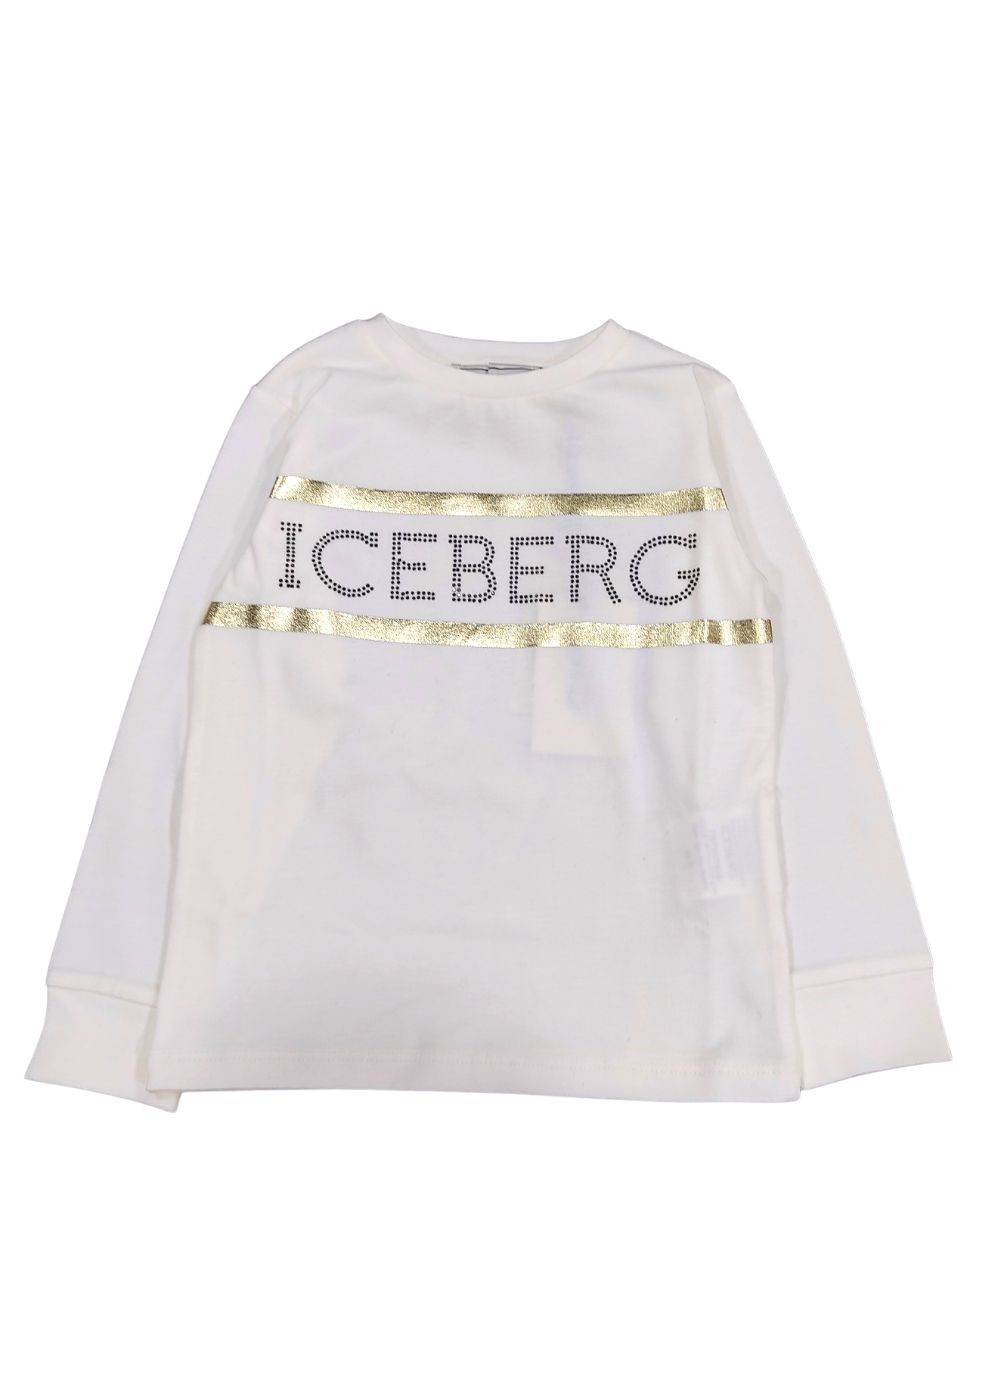 Featured image for “ICEBERG T-SHIRT MANICHE LUNGHE”